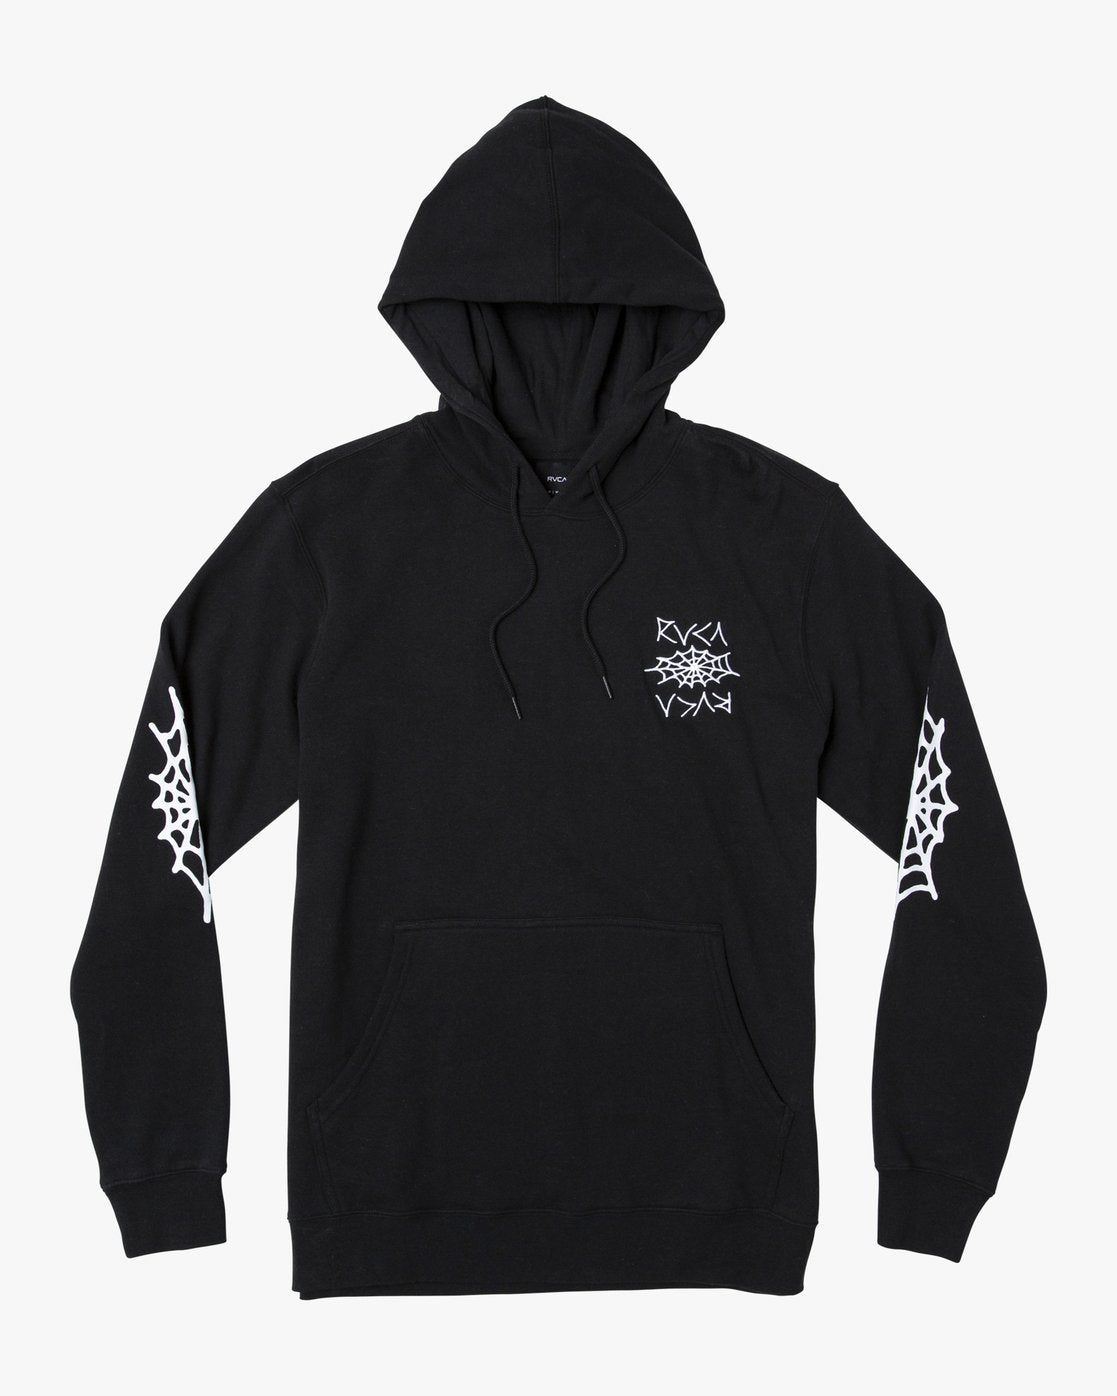 RVCA Creep Pack Hoodie -MD ONLY- NO RETURNS RVCA 